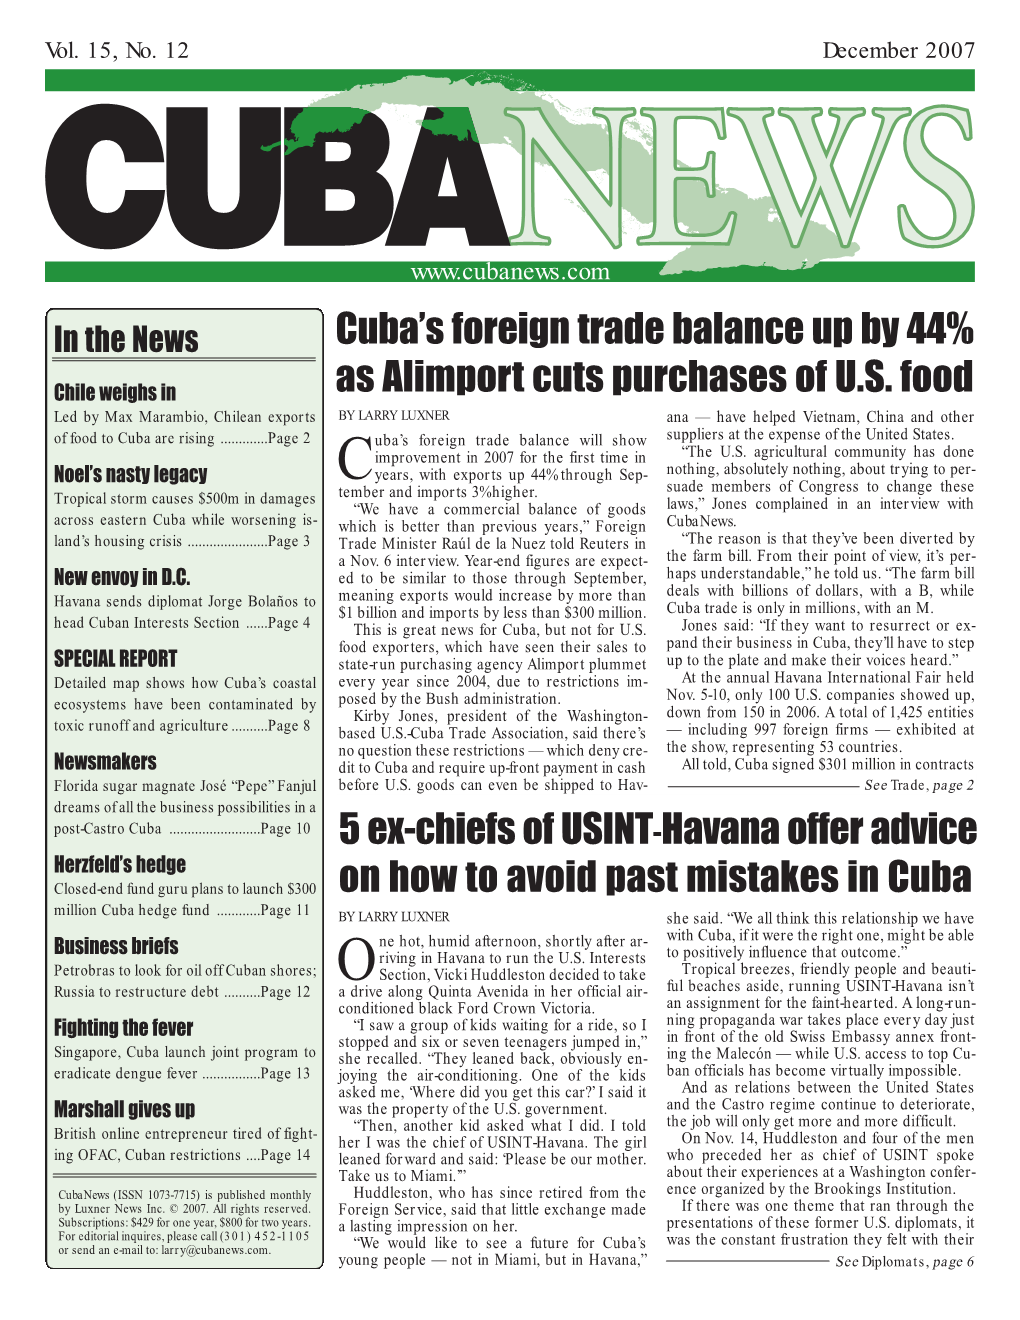 Cuba's Foreign Trade Balance up by 44% As Alimport Cuts Purchases Of